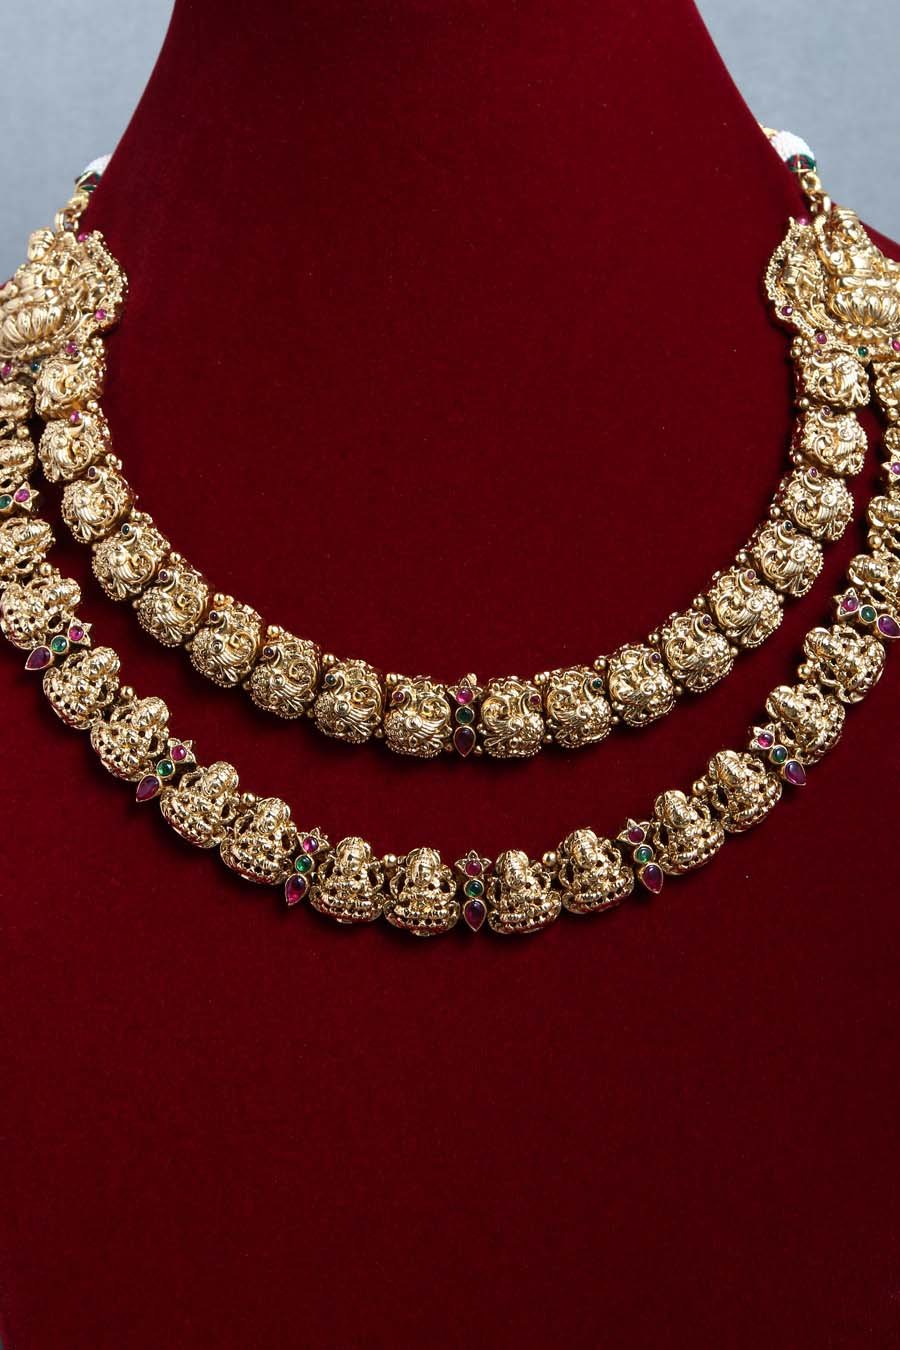 Classy Layered Gold Necklace - N1388